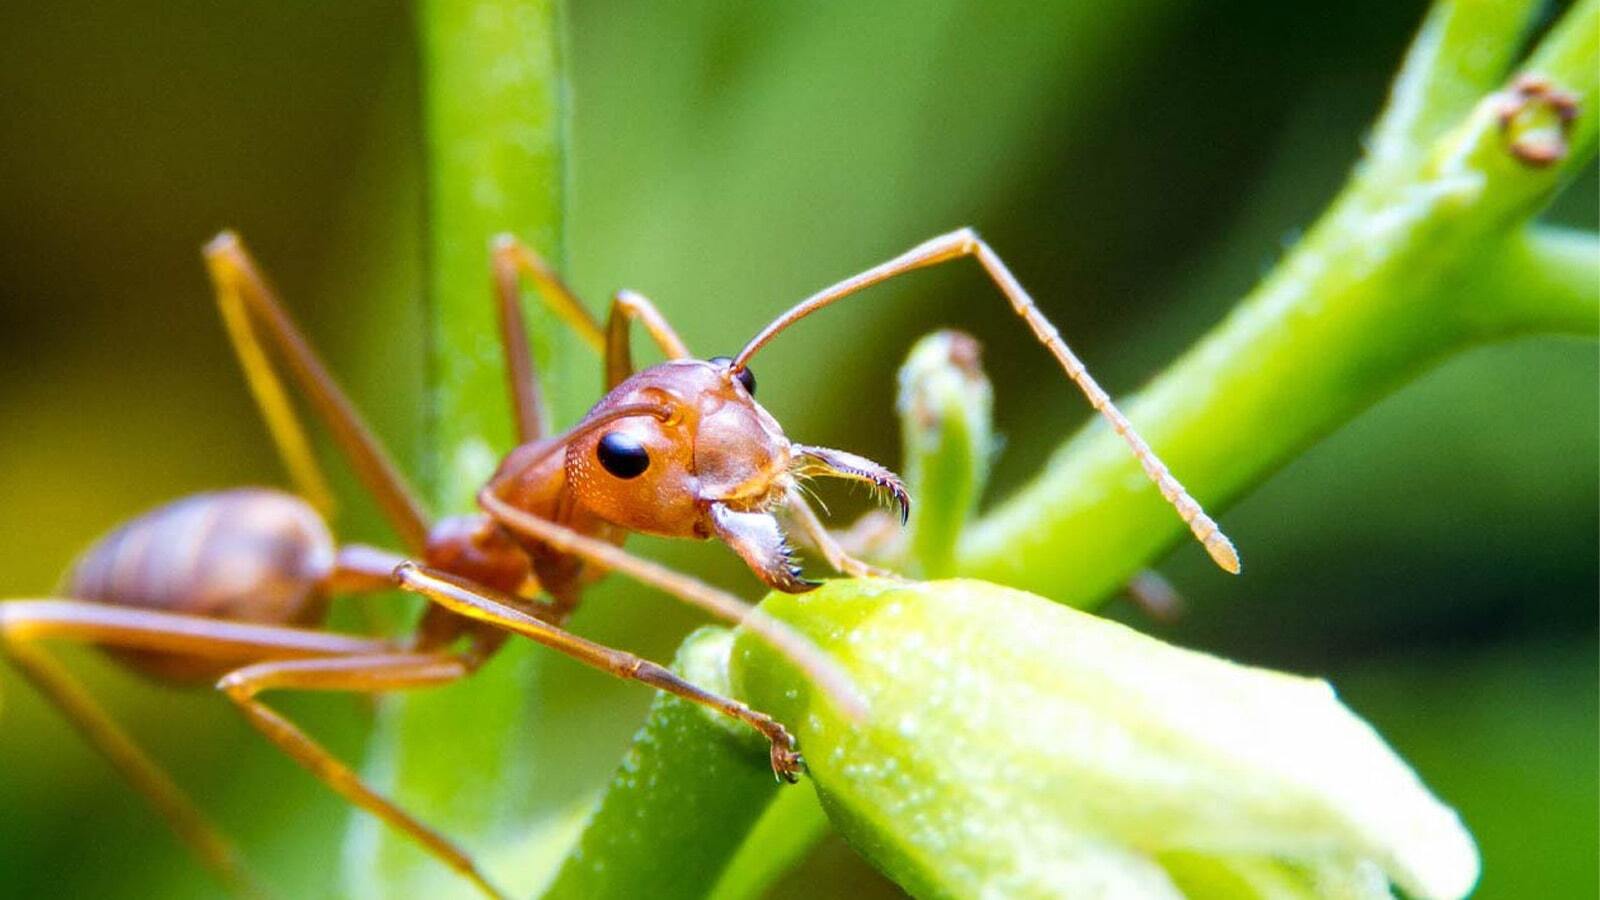 What to do about fire ants in your yard